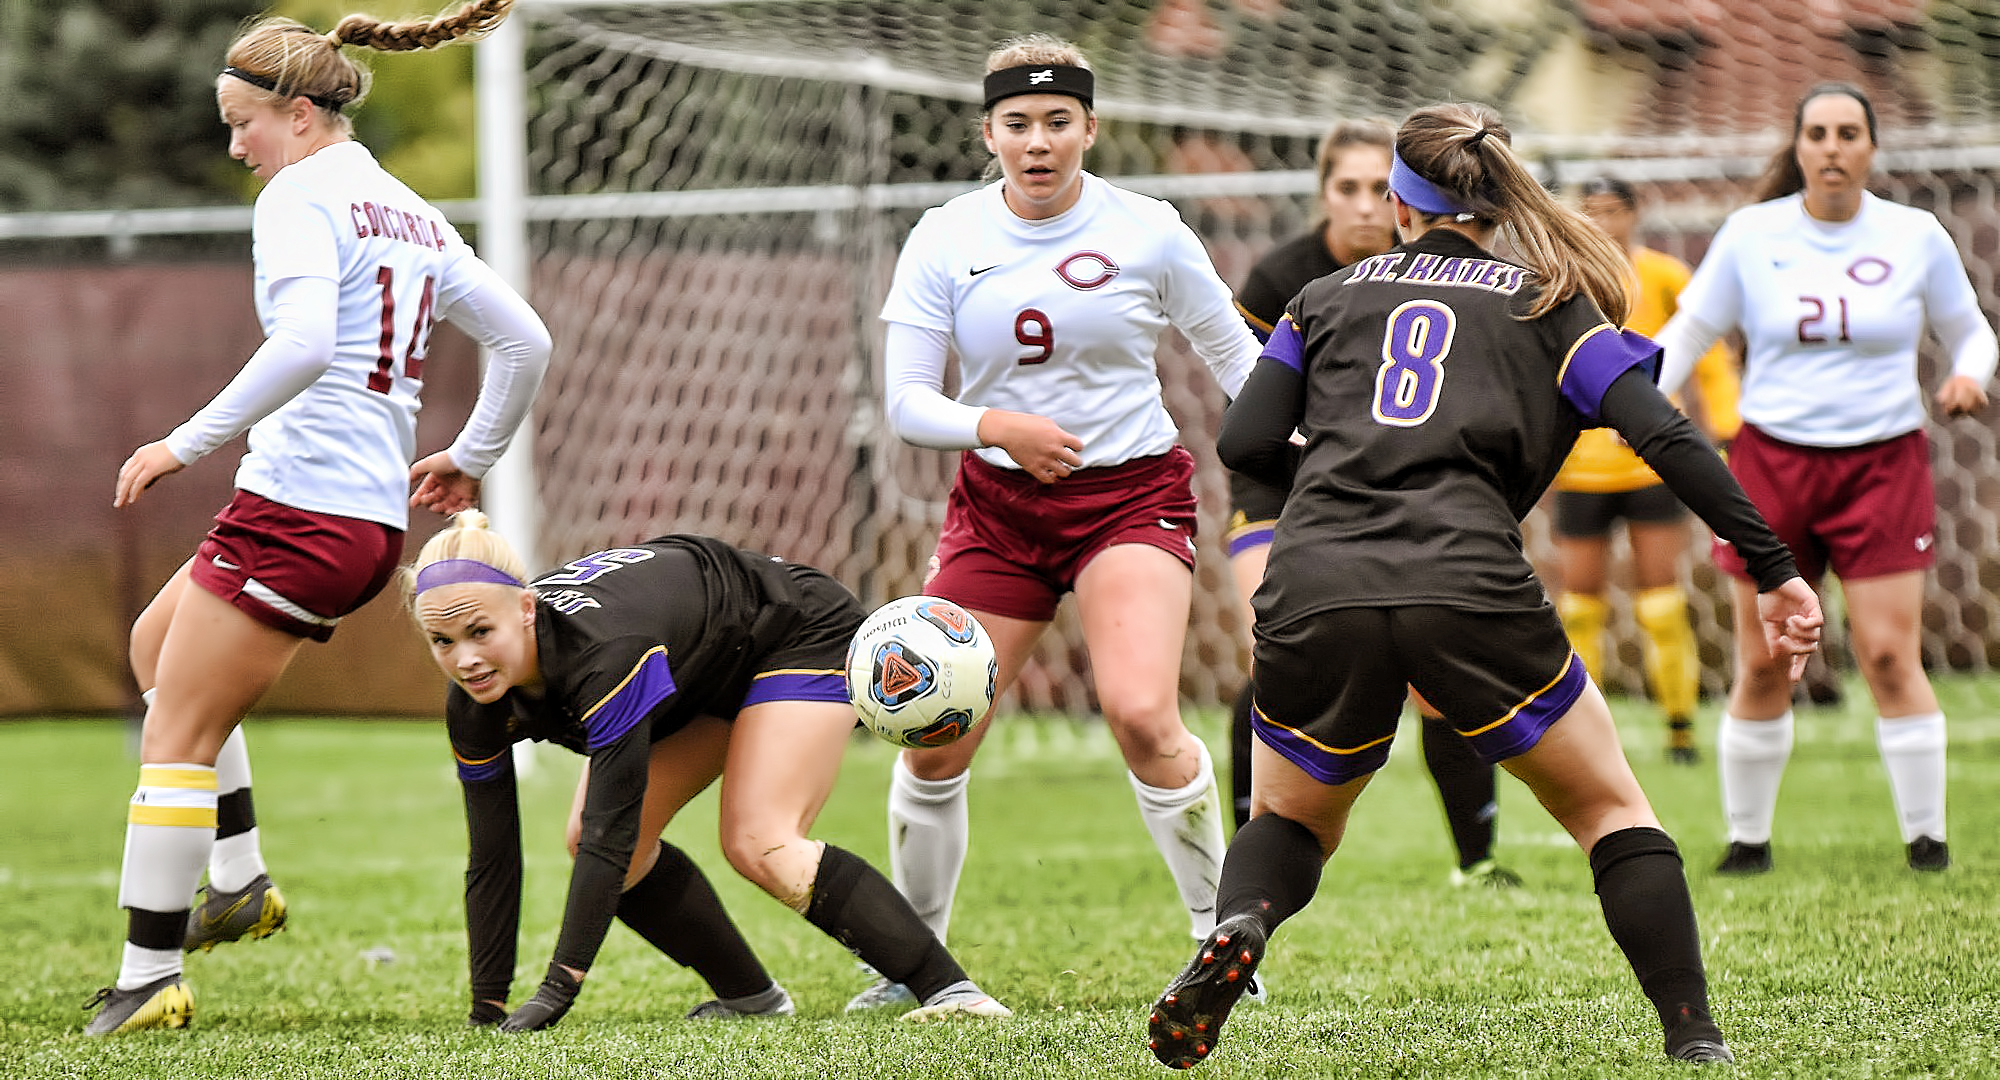 Freshman Grace Lawlor (#9) defends against a pair of St. Catherine attackers. Lawlor had the Cobber goal against the Wildcats.